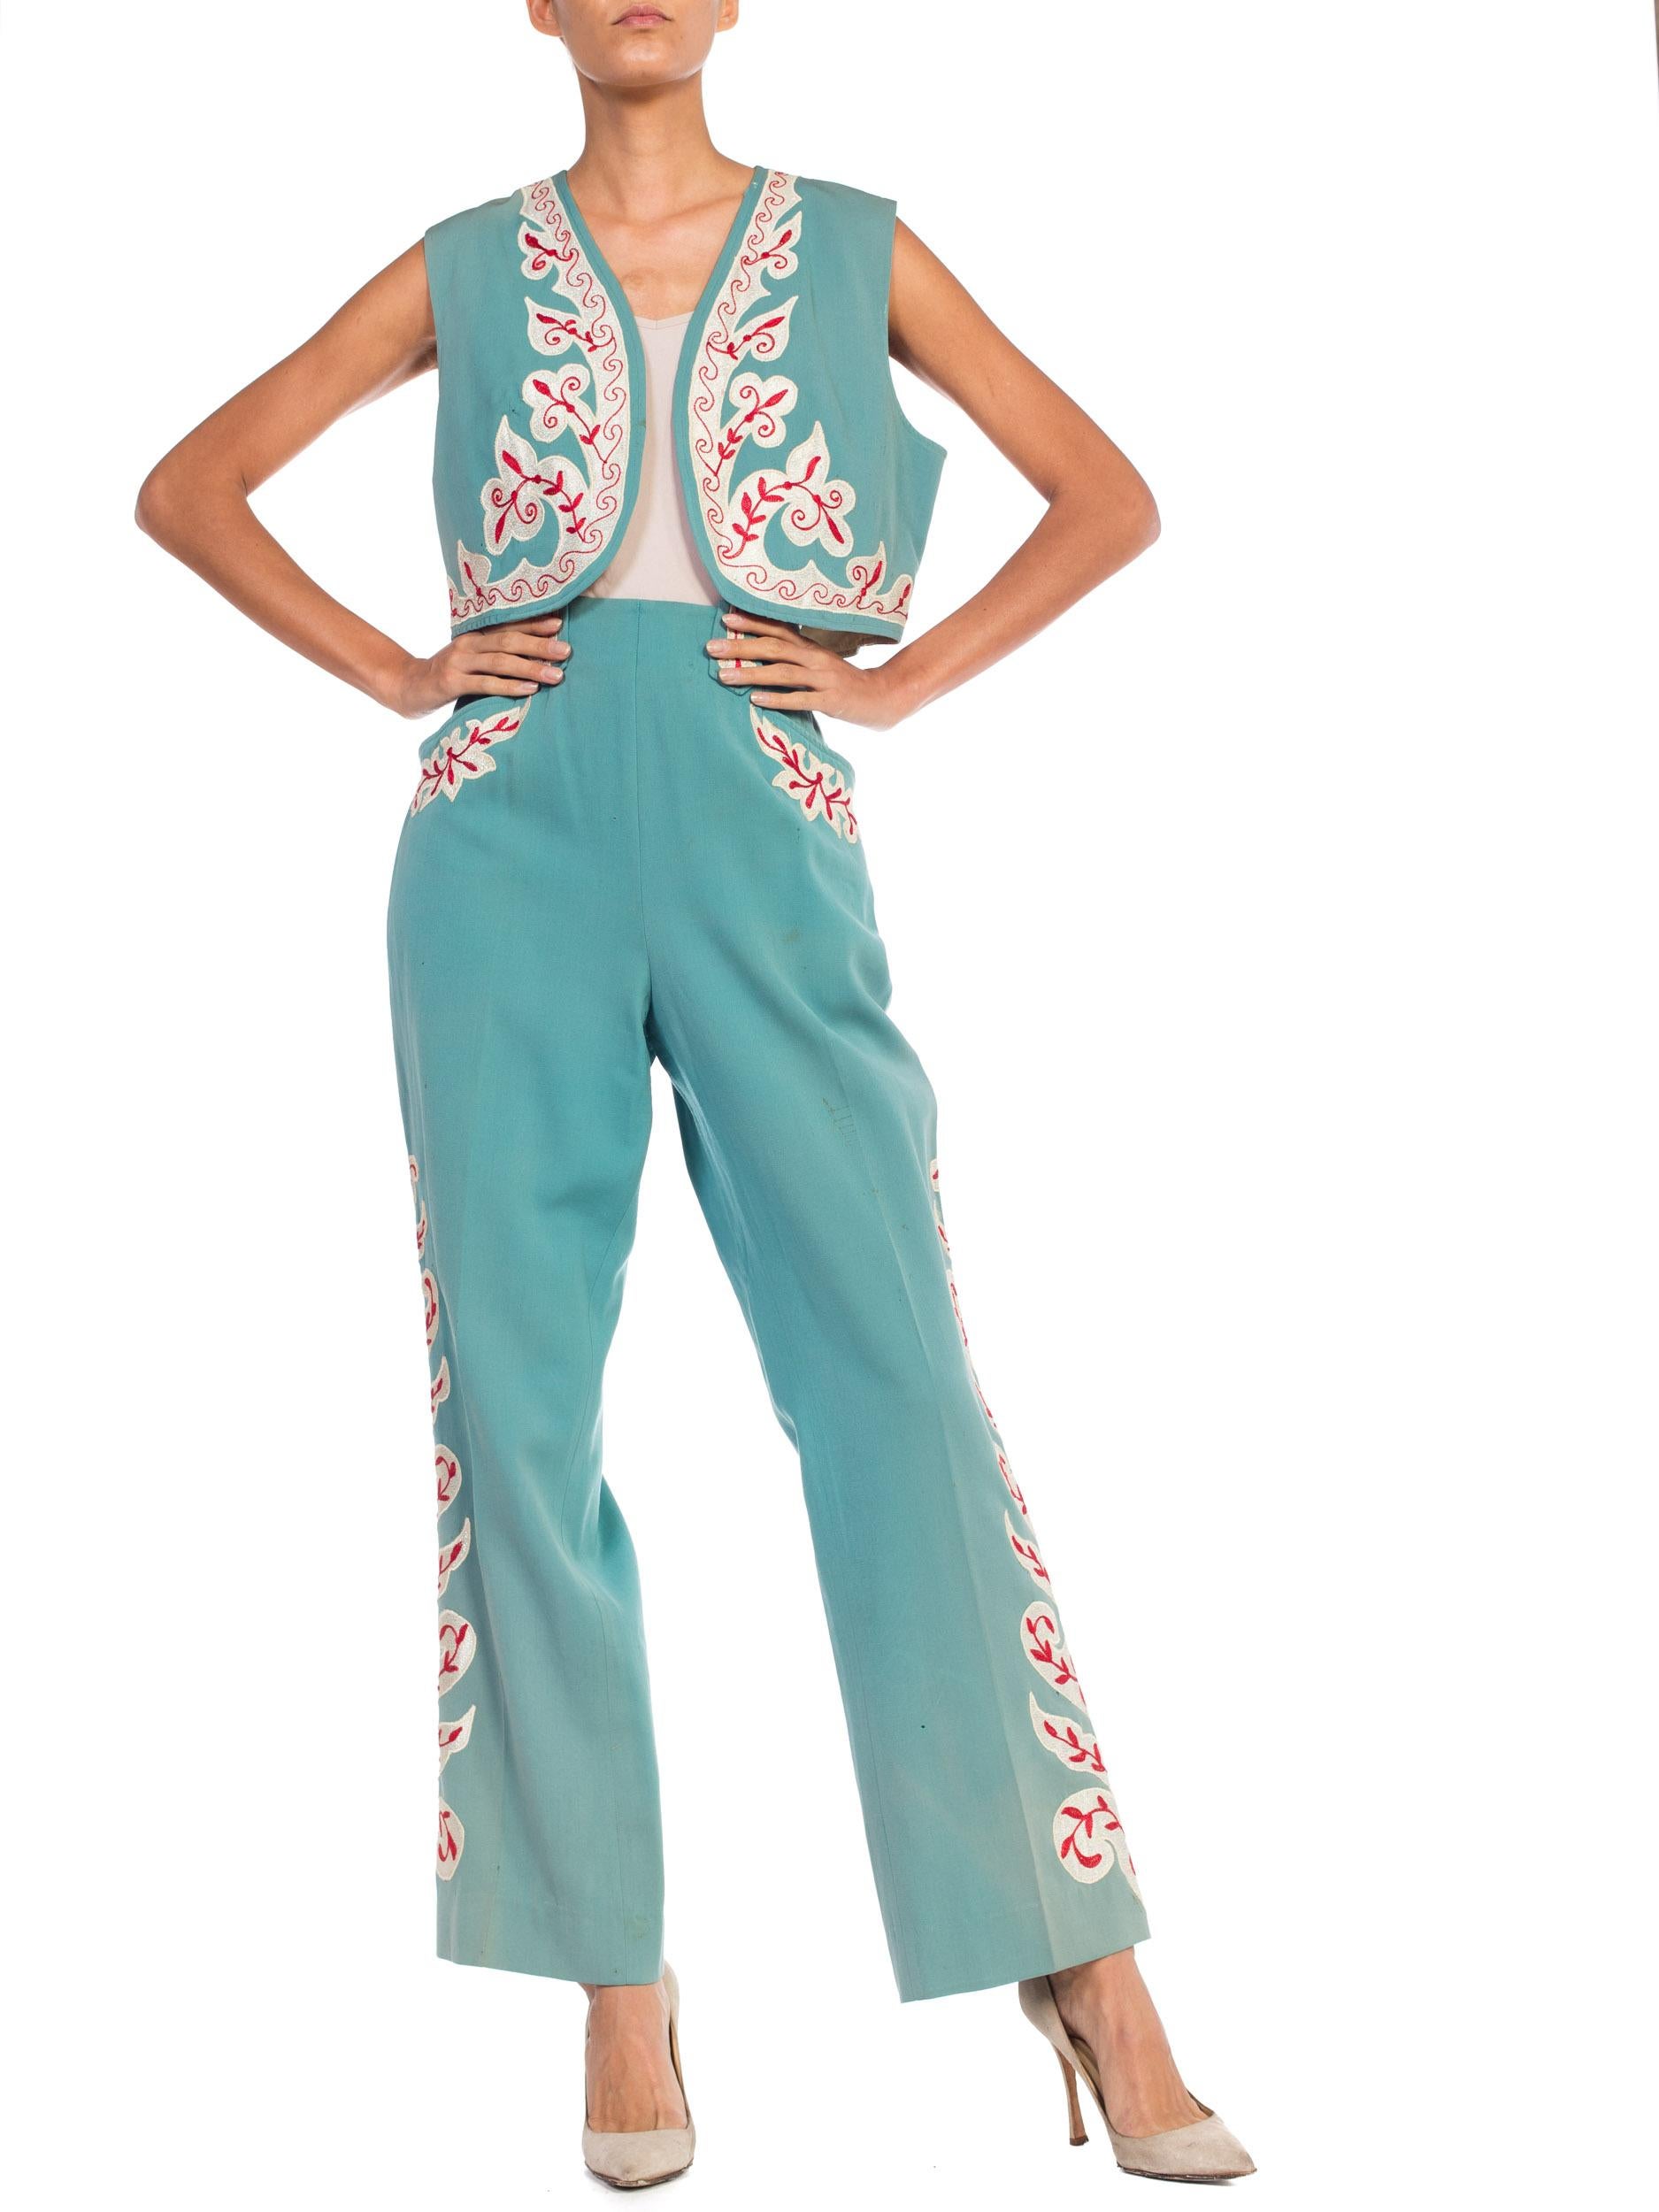 Women's 1940S Teal Wool Blend Embroidered Western Vest & Pants Ensemble